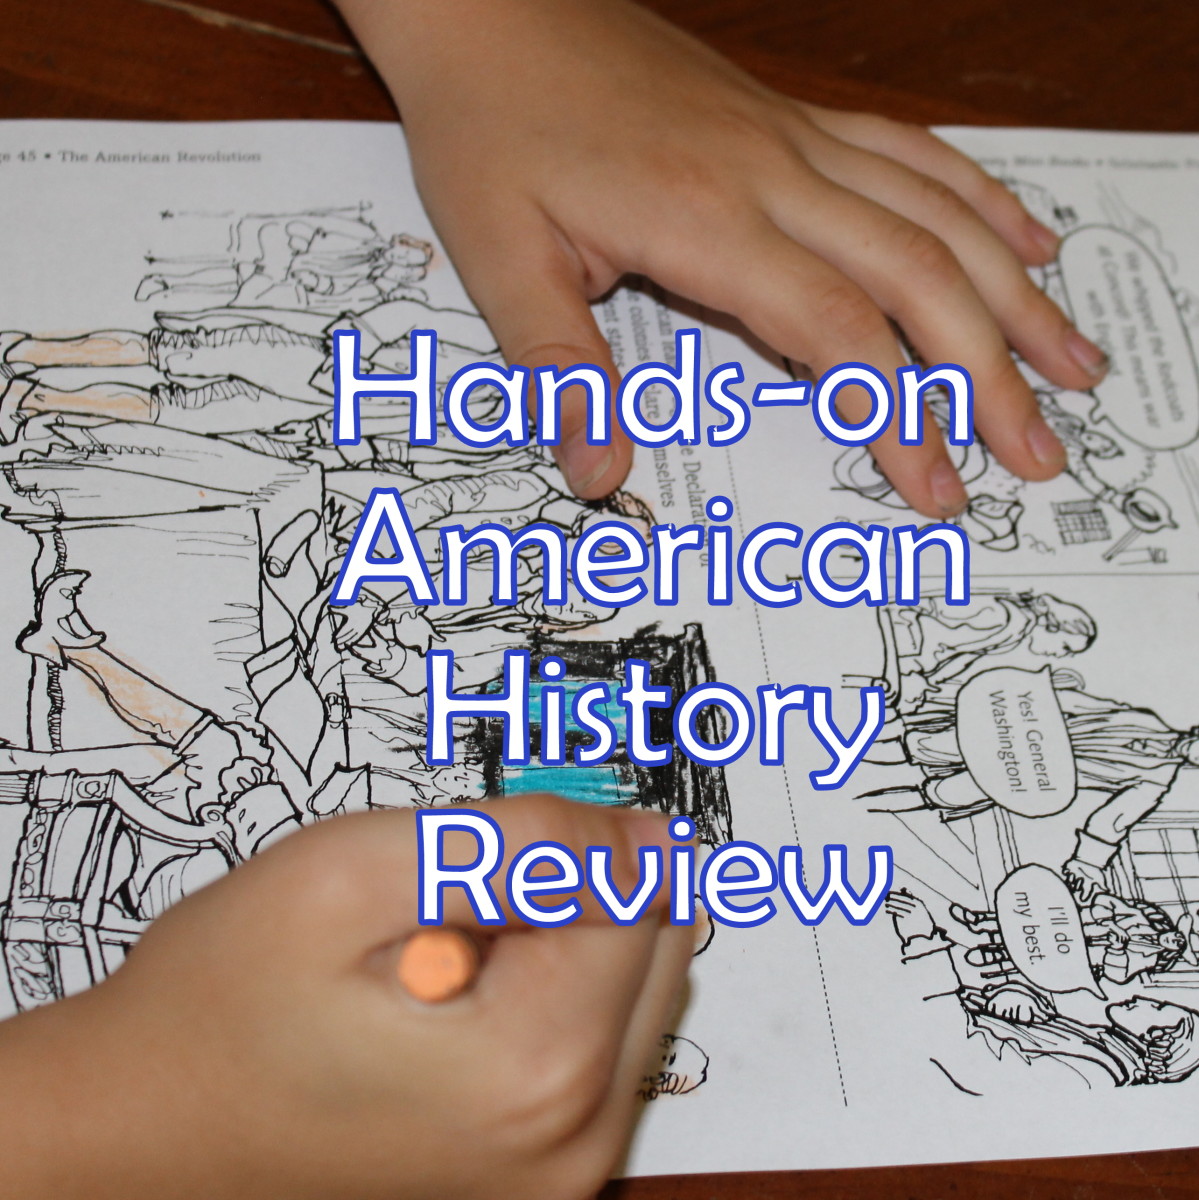 American Literature & American War for Independence Review for Kids